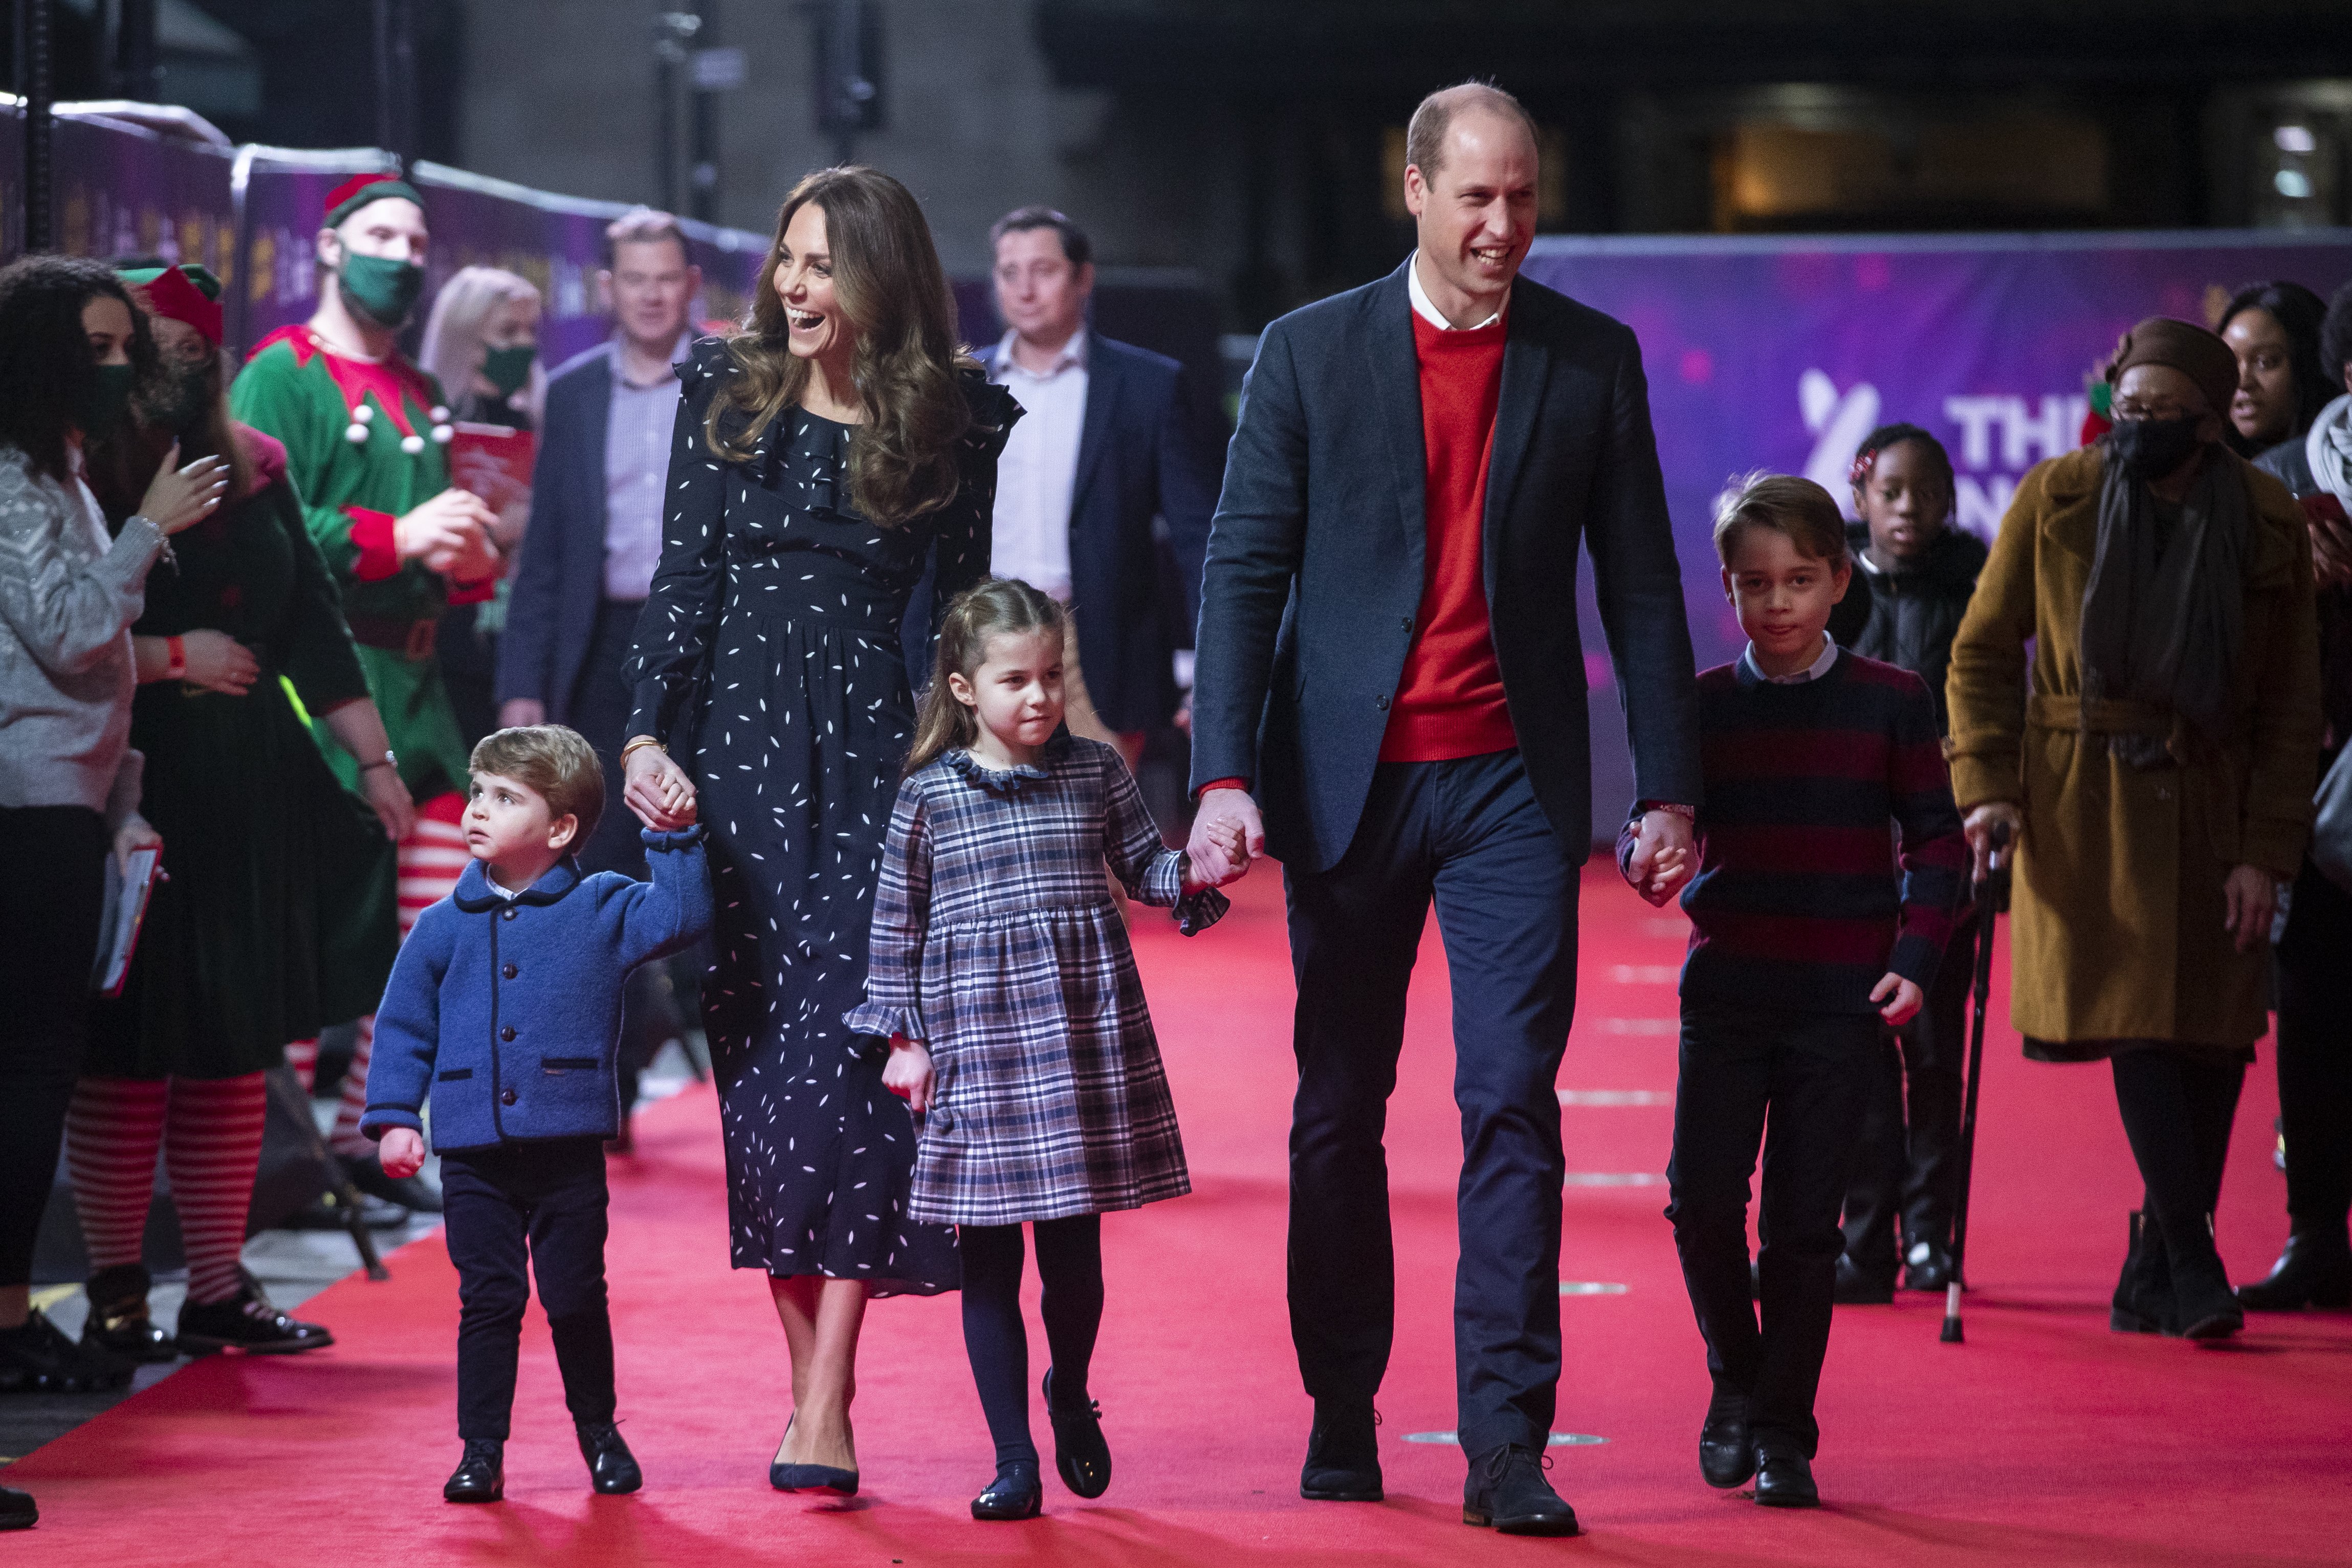 Prince William, Duke of Cambridge and Catherine, Duchess of Cambridge with their children, Prince Louis, Princess Charlotte and Prince George at a special pantomime performance at London's Palladium Theatre on December 11, 2020 in London, England. | Source: Getty Images